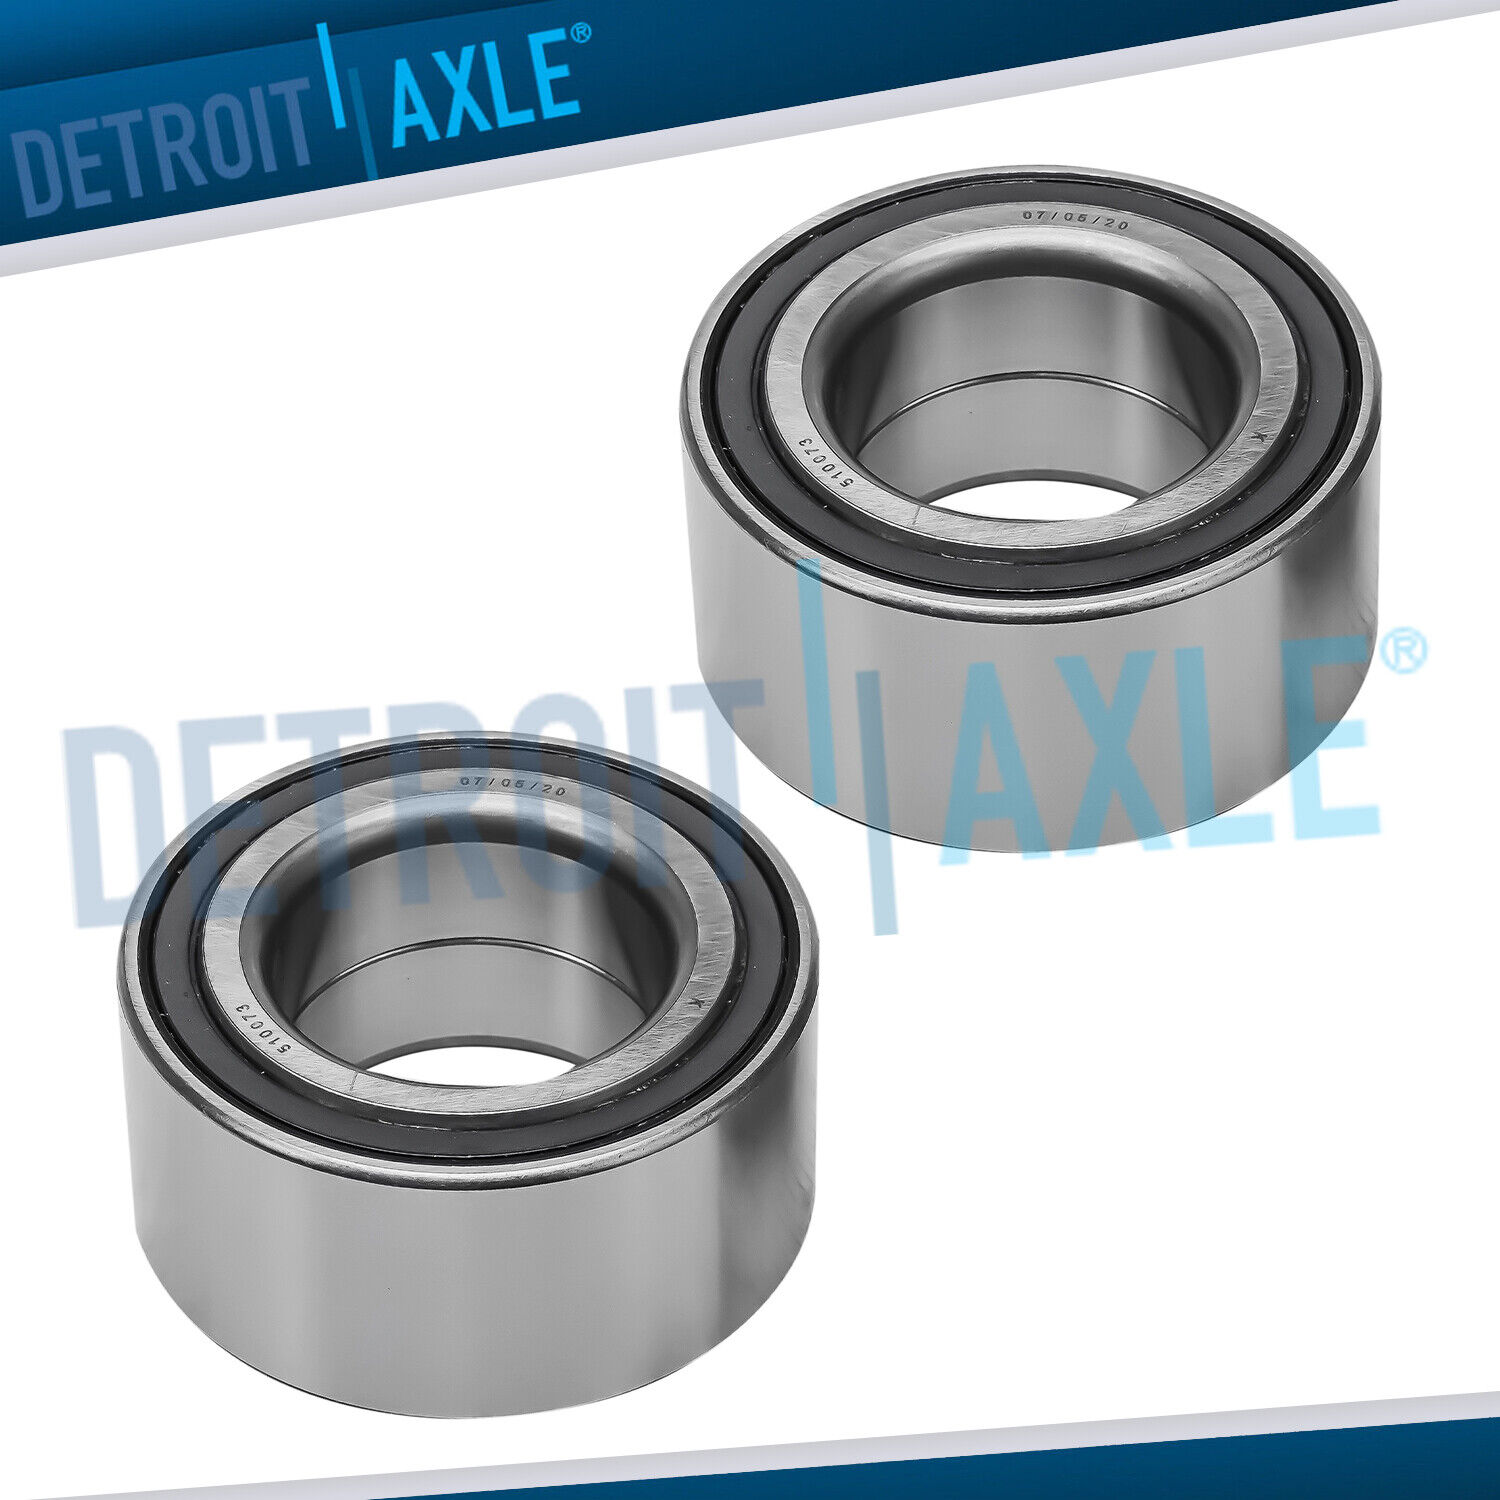 TWO New Rear Wheel Bearings for Jaguar X-Type XK XKR XJ XJR with ABS